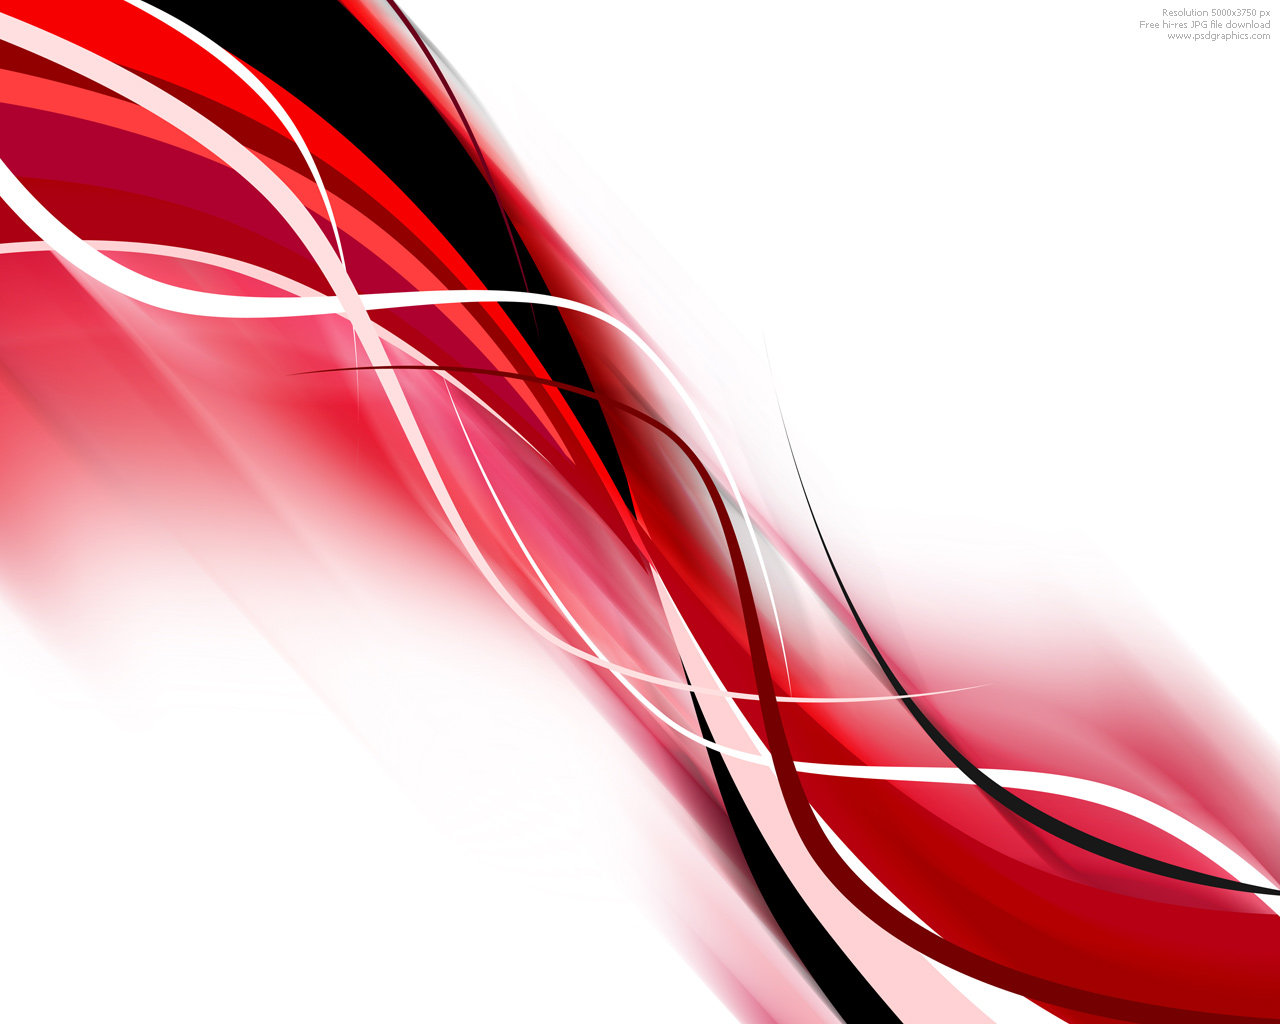 Abstract blue background. Size: 1,3 MB Format: JPG Color theme: red, pink, blue, white. Keywords: abstract backgrounds, modern design, total confusion, ...